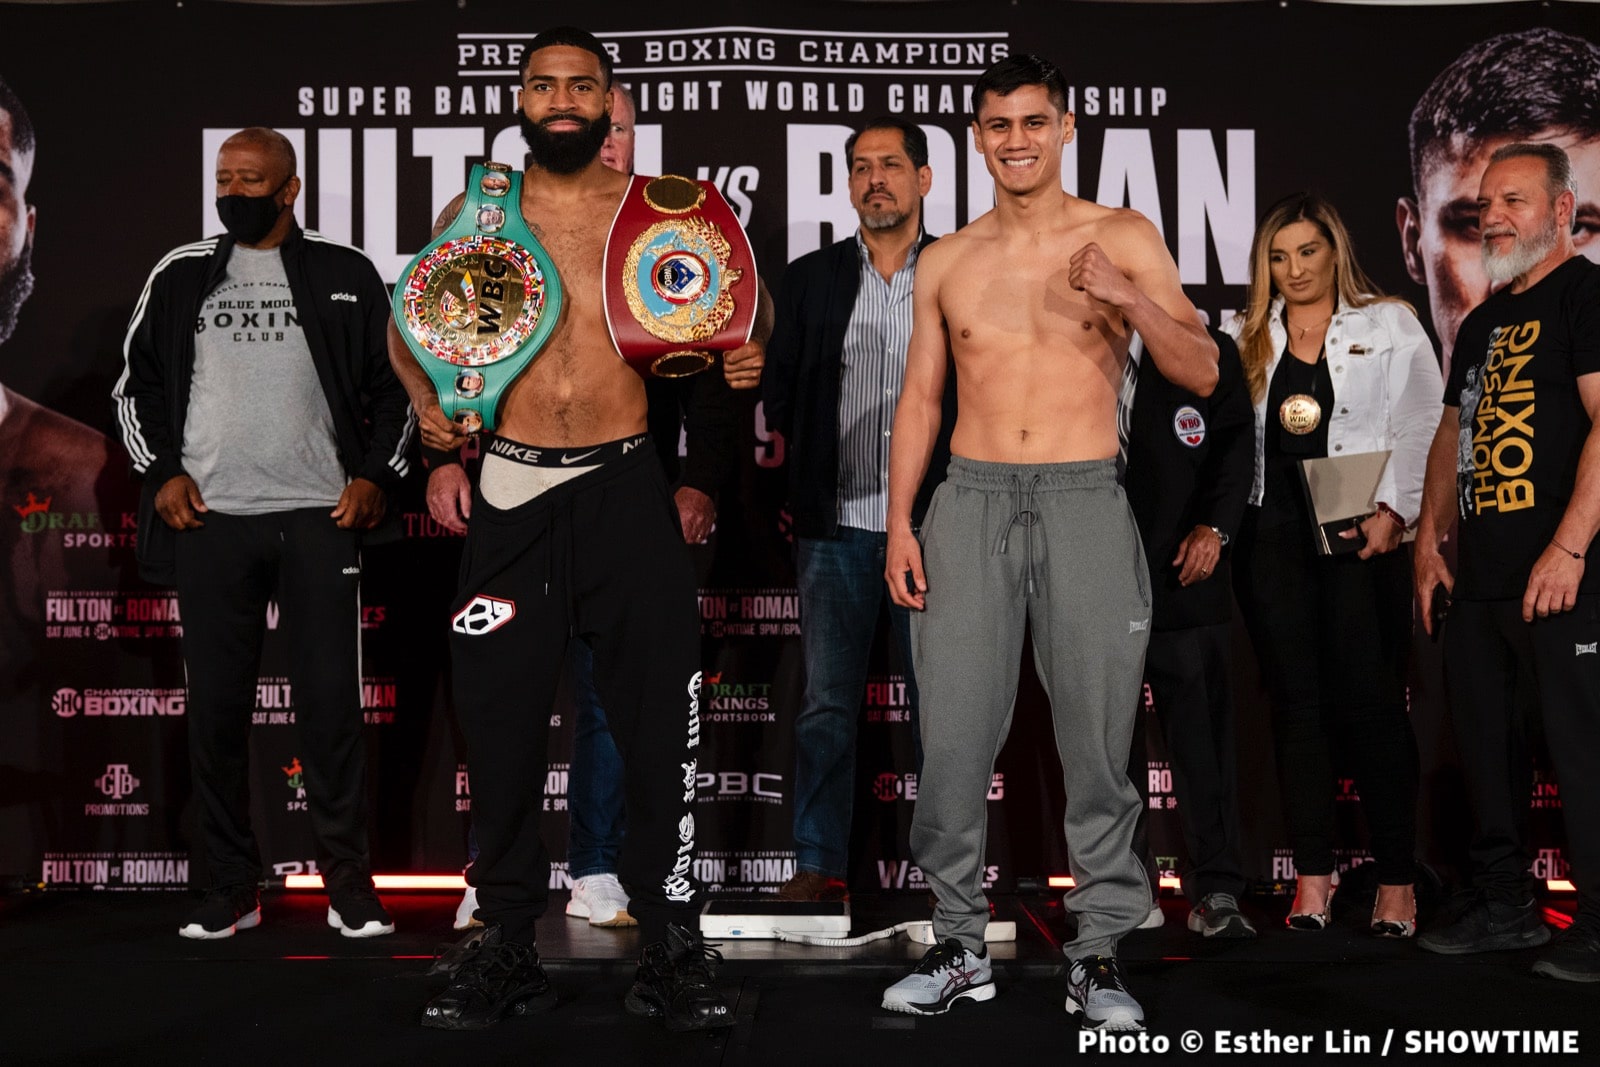 Image: Fulton - Roman Official Showtime Weigh In Results